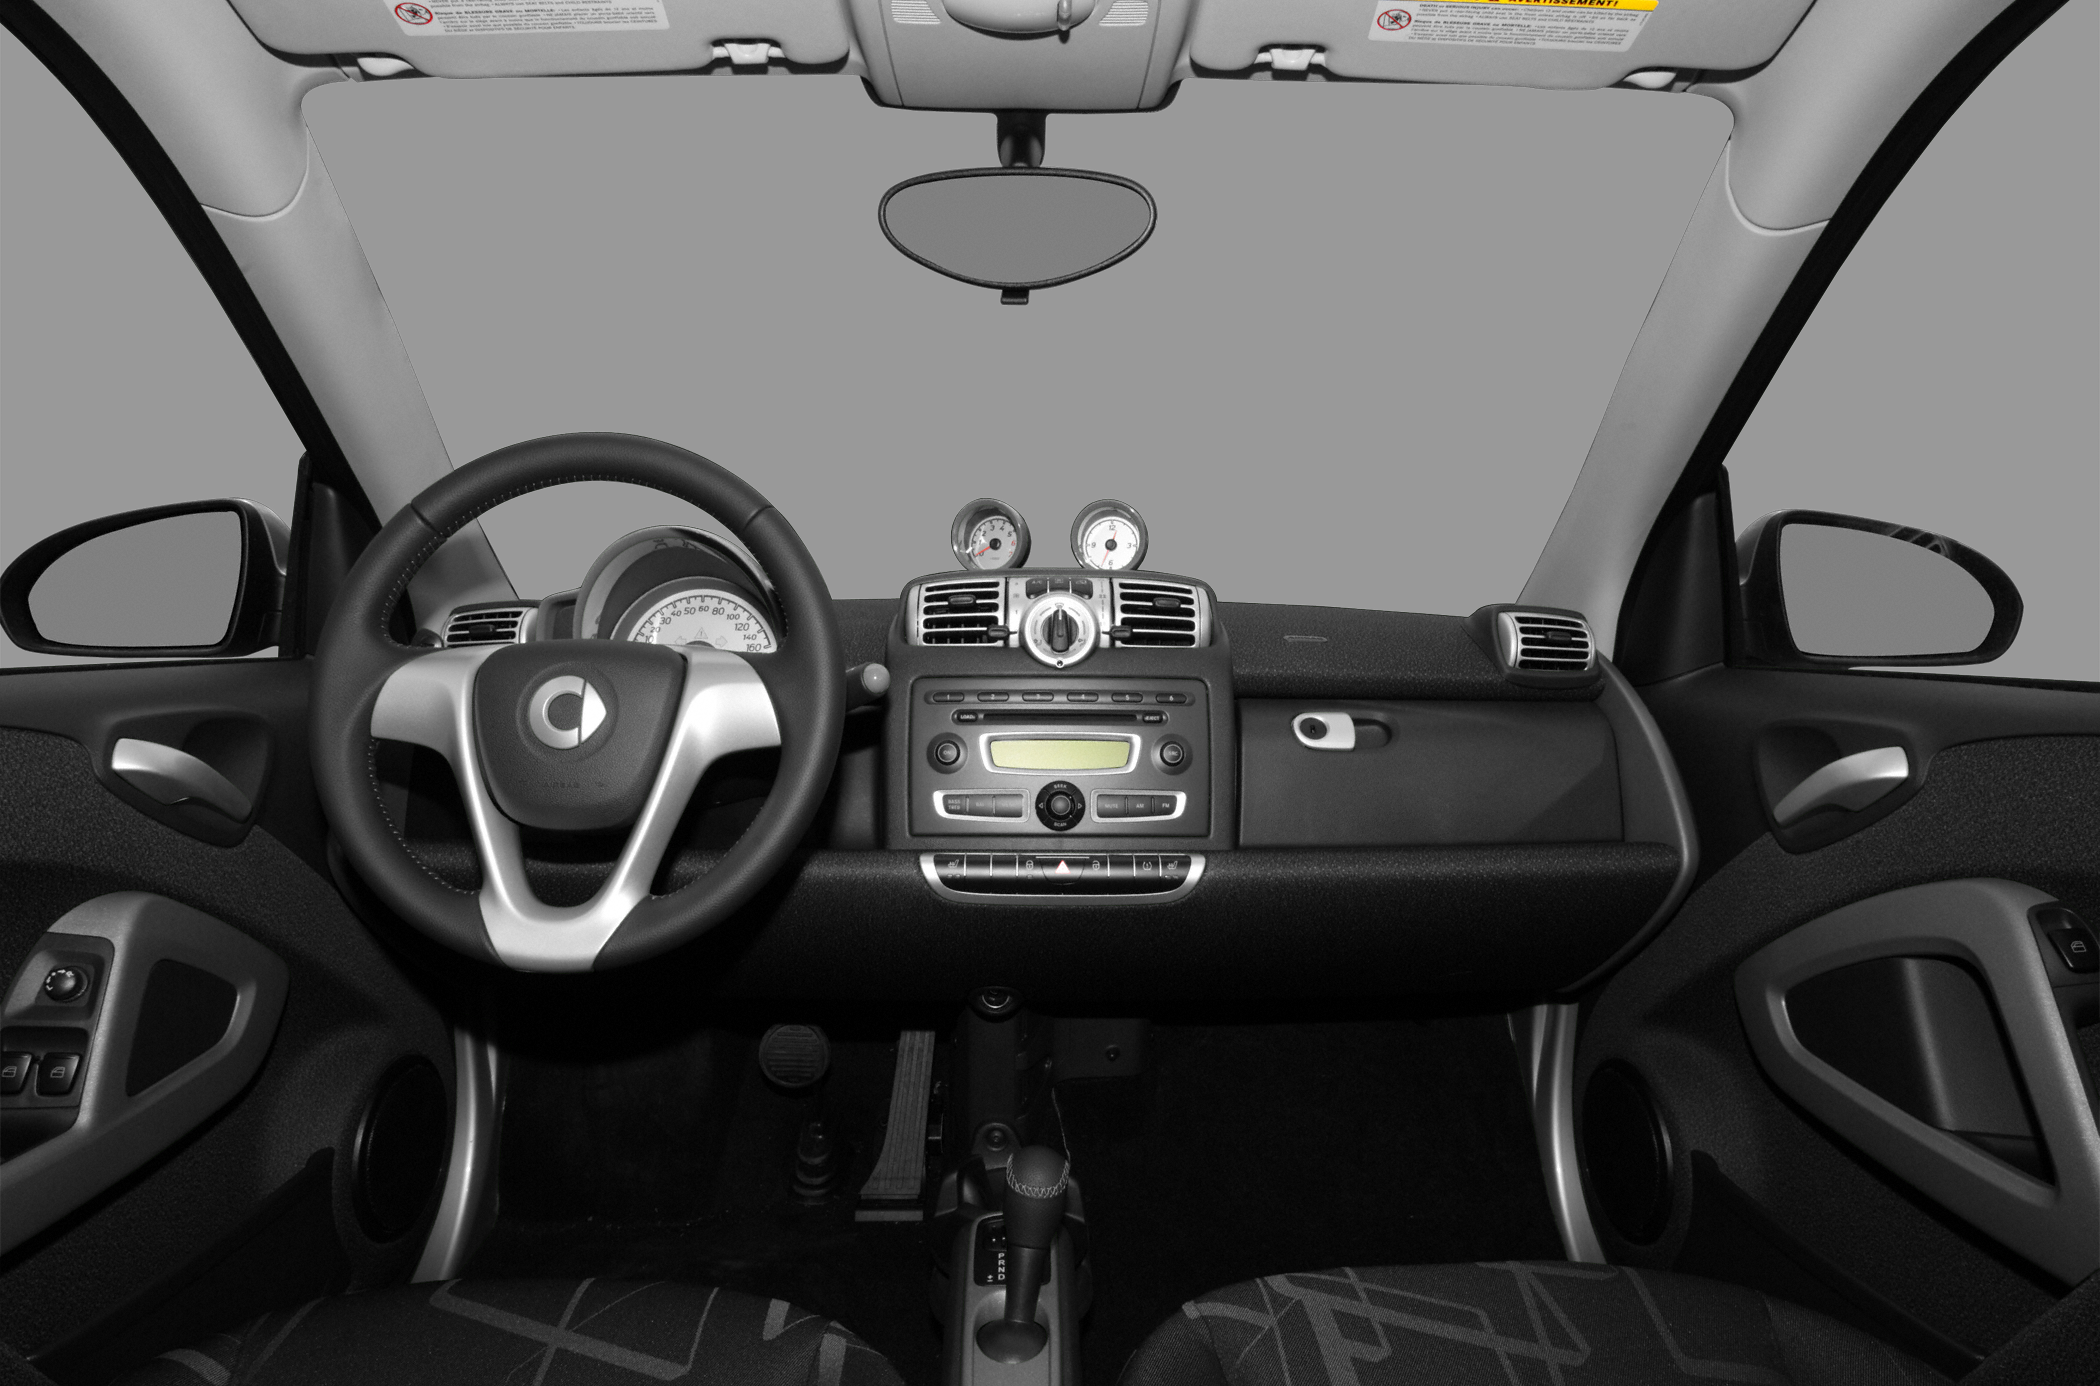 2012 smart ForTwo